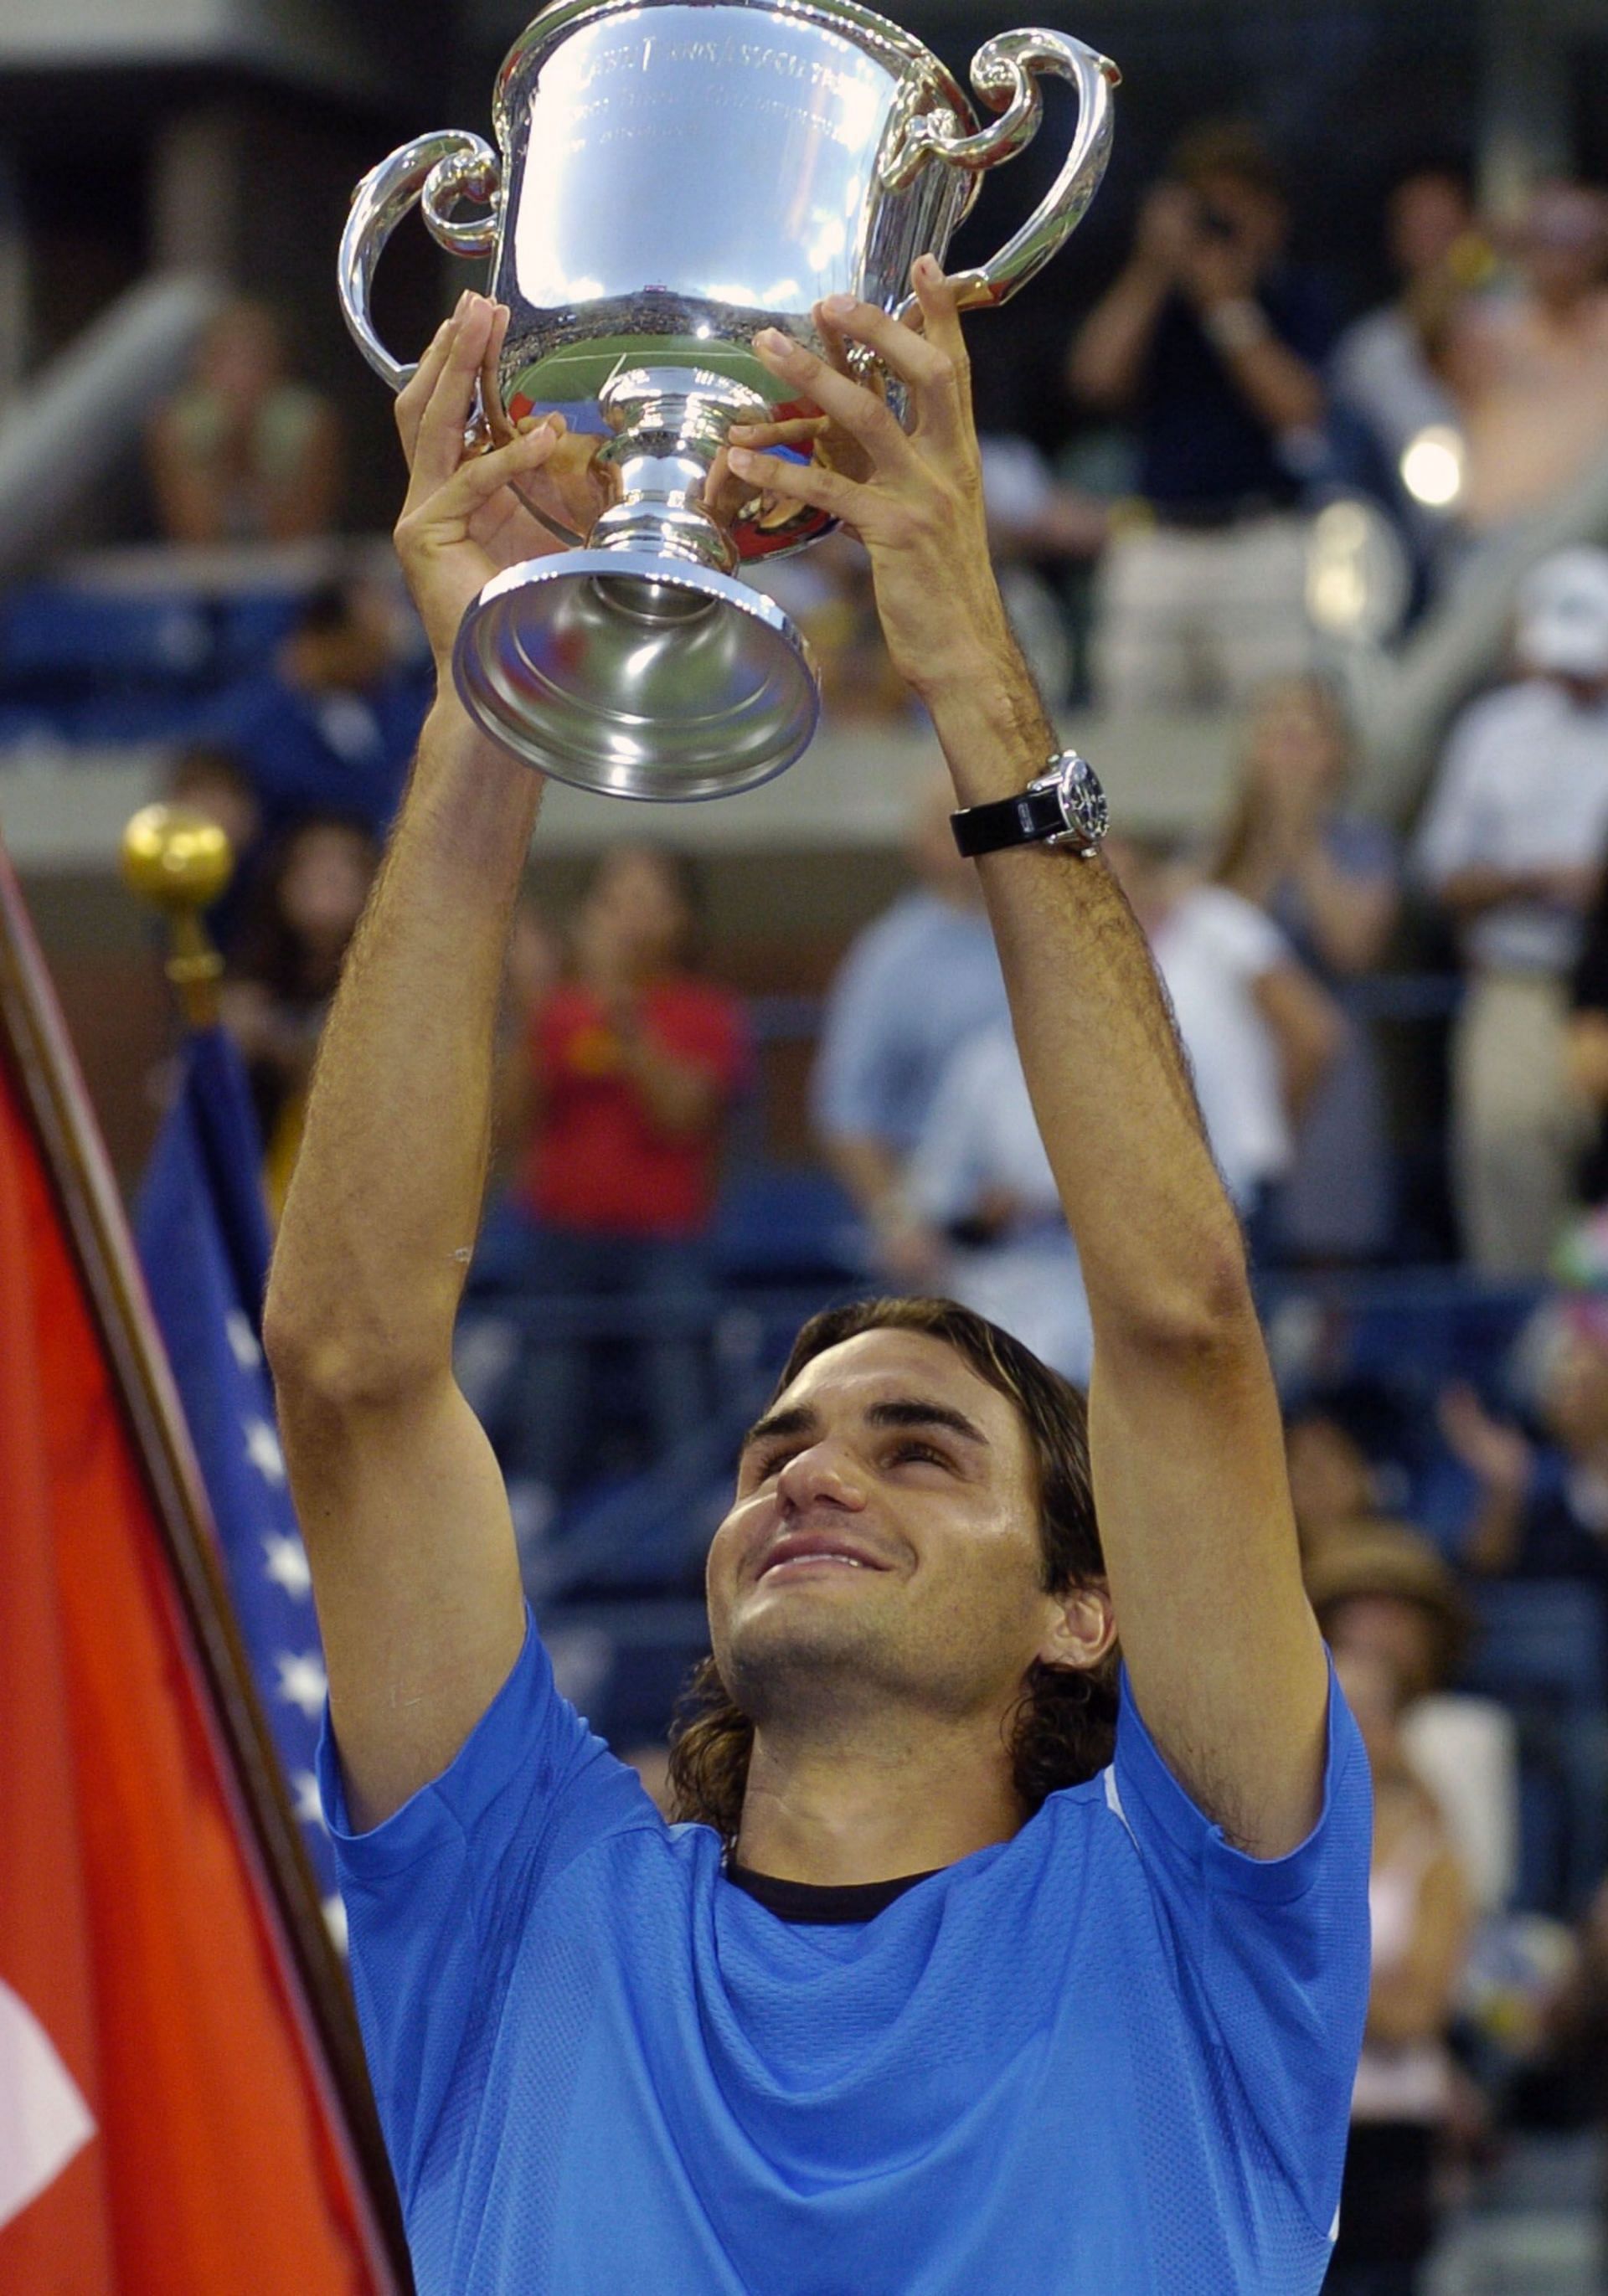 Roger Federer lifts the 2004 US Open title after beating Lleyton Hewitt in the final